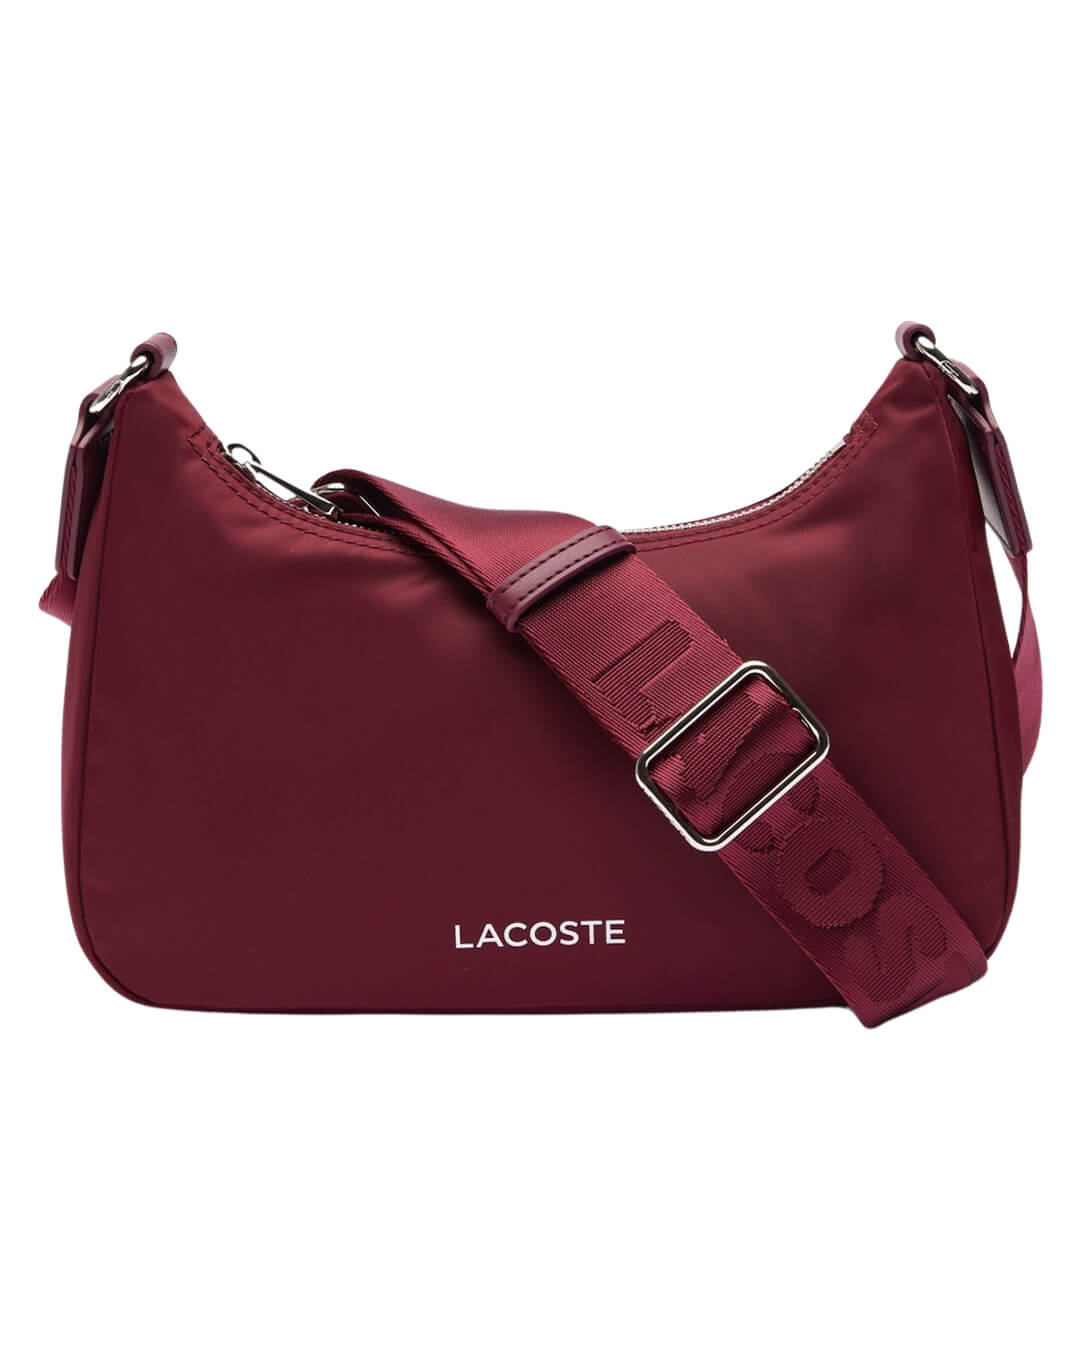 Lacoste Bags ONE Lacoste Burgundy Active Daily Hobo Bag